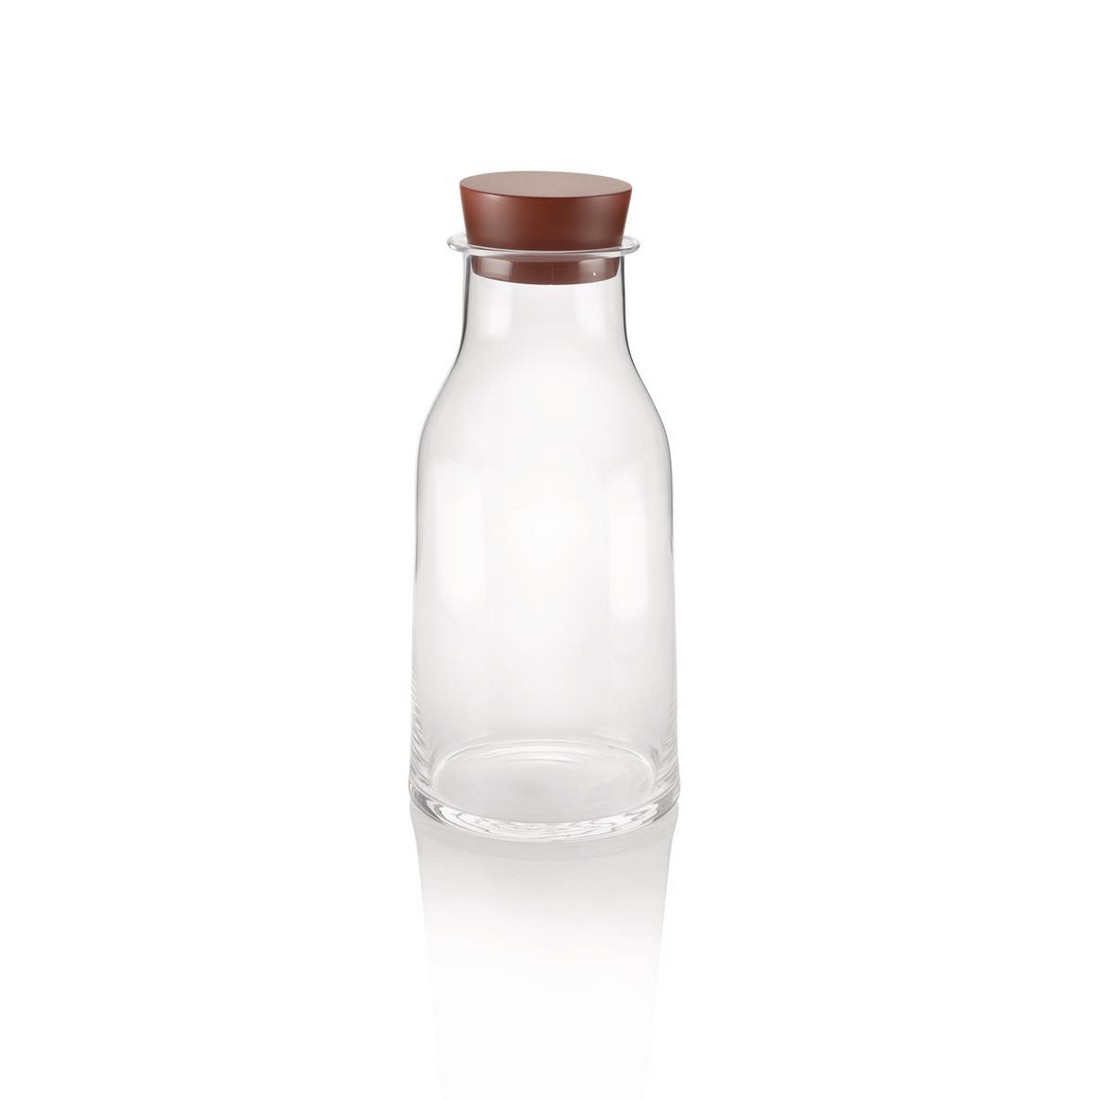 Alessi-Tonale crystalline glass carafe with silicone stopper